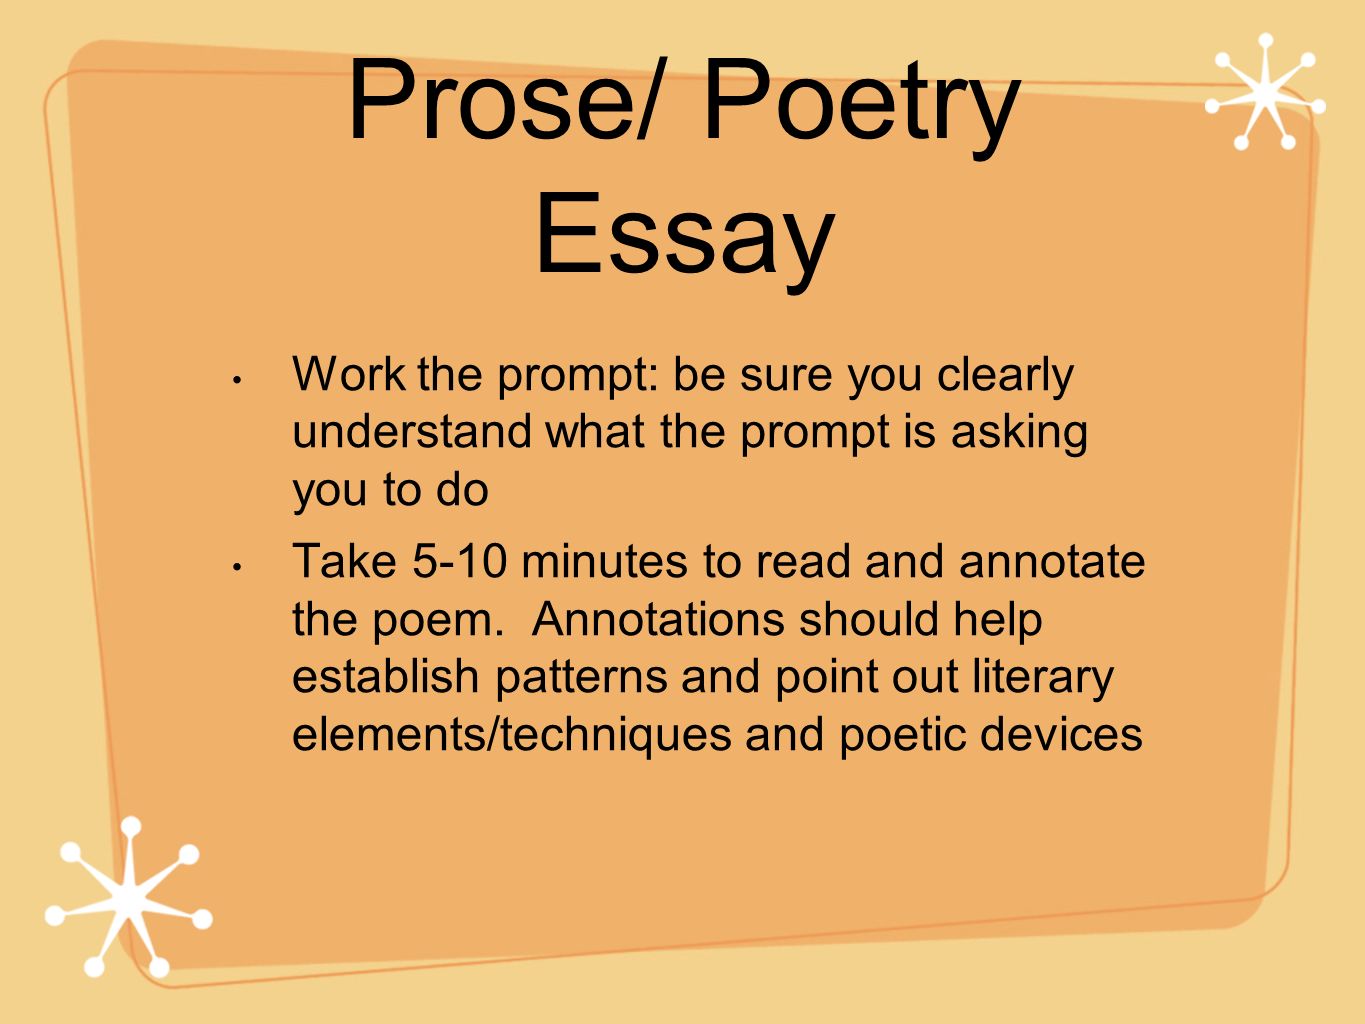 How to Write a Poetry Analysis Essay Comparing & Contrasting Two Poems